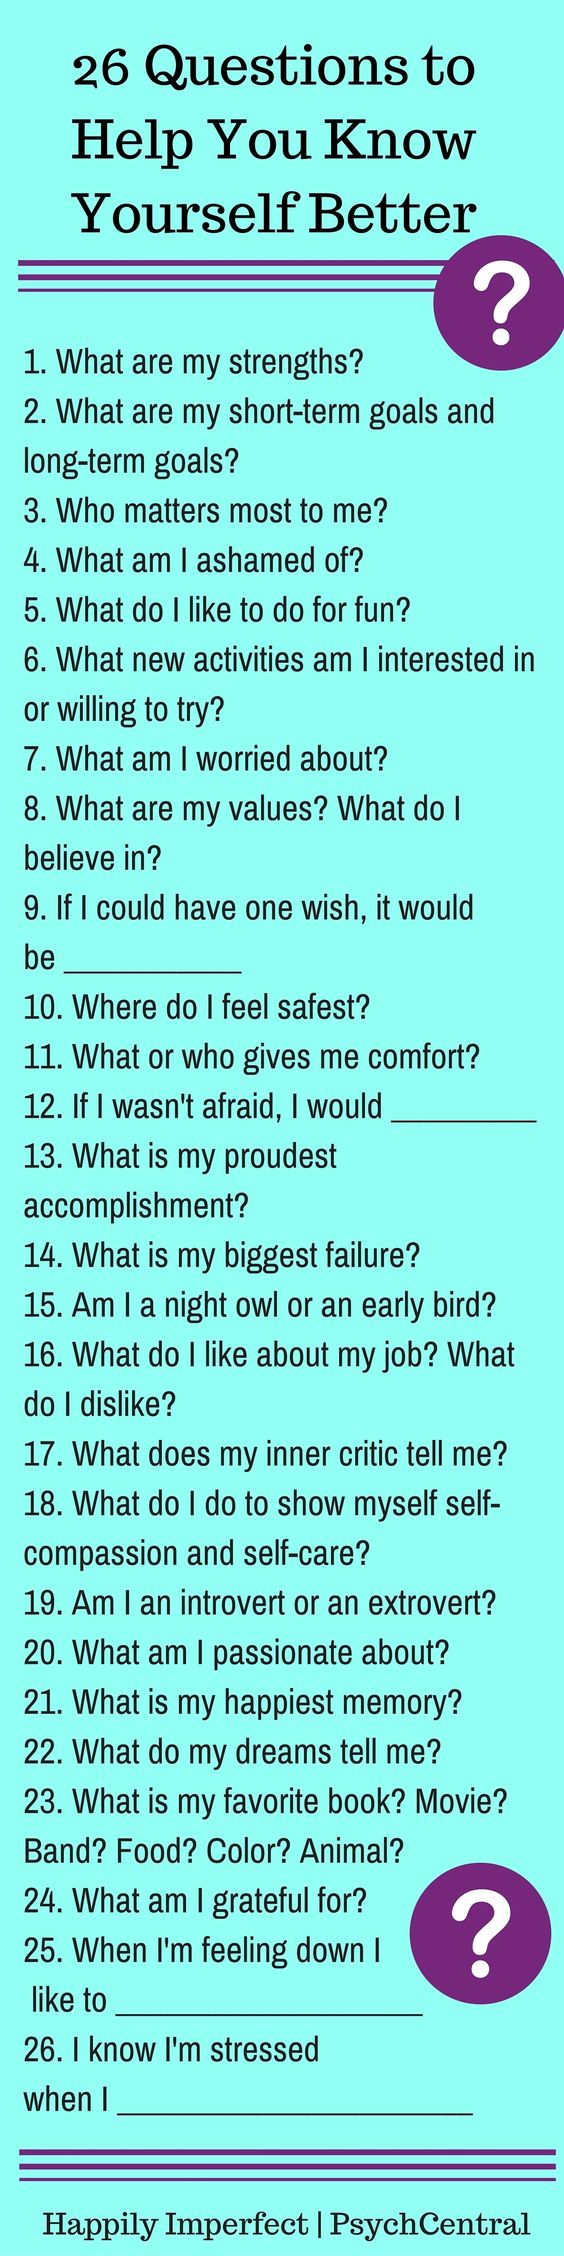 26 Questions to Help You Know Yourself Better